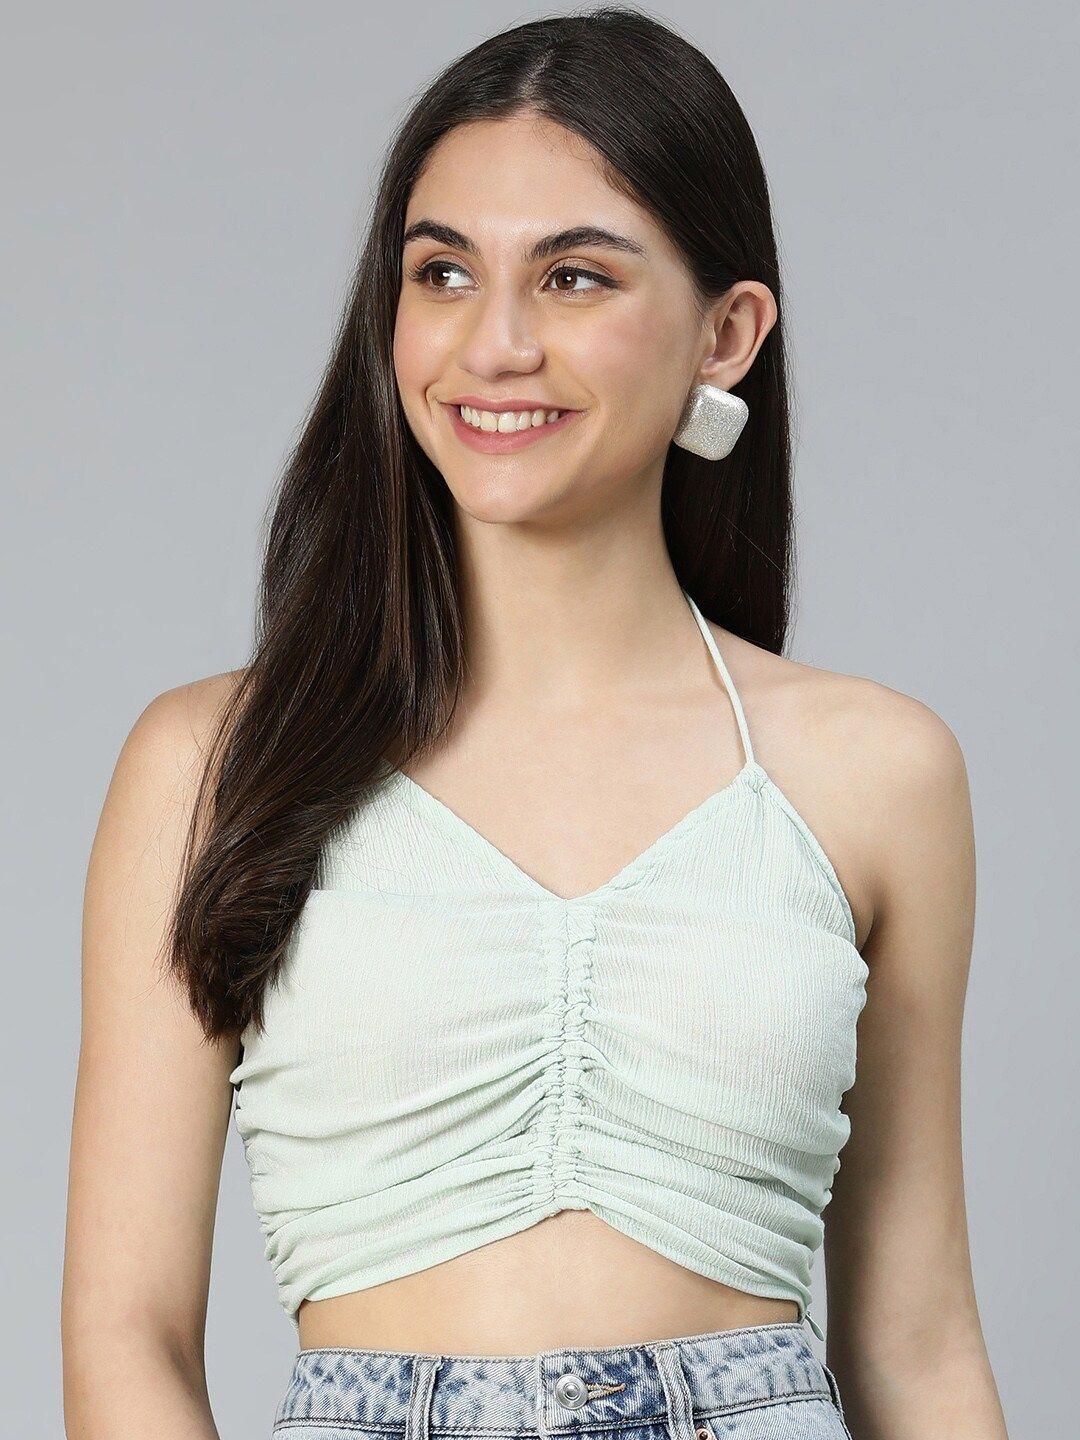 oxolloxo-lime-green-bralette-crop-top